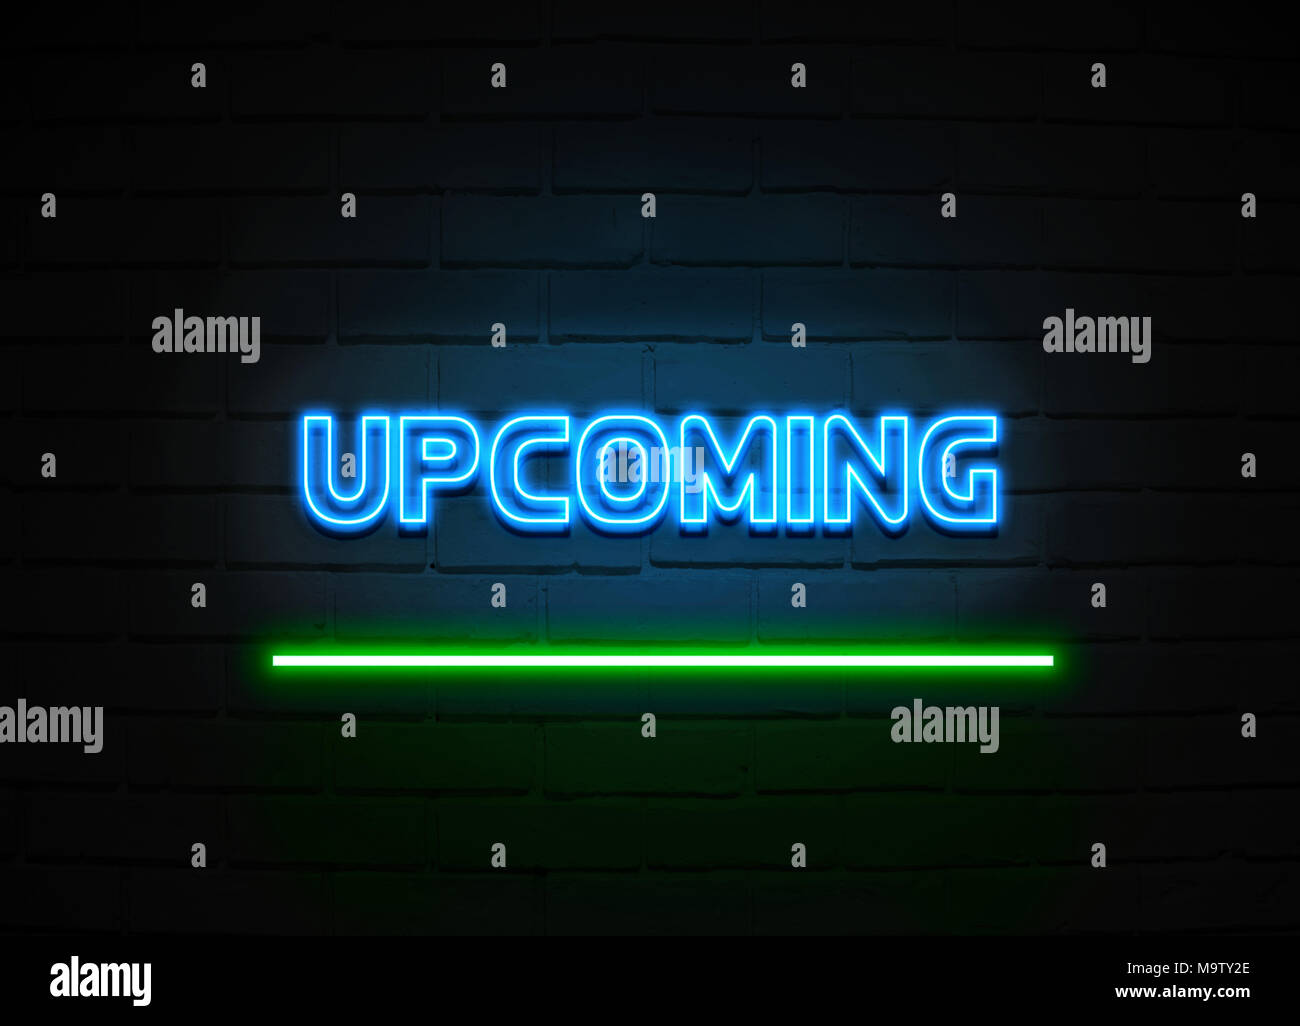 Upcoming neon sign - Glowing Neon Sign on brickwall wall - 3D rendered royalty free stock illustration. Stock Photo